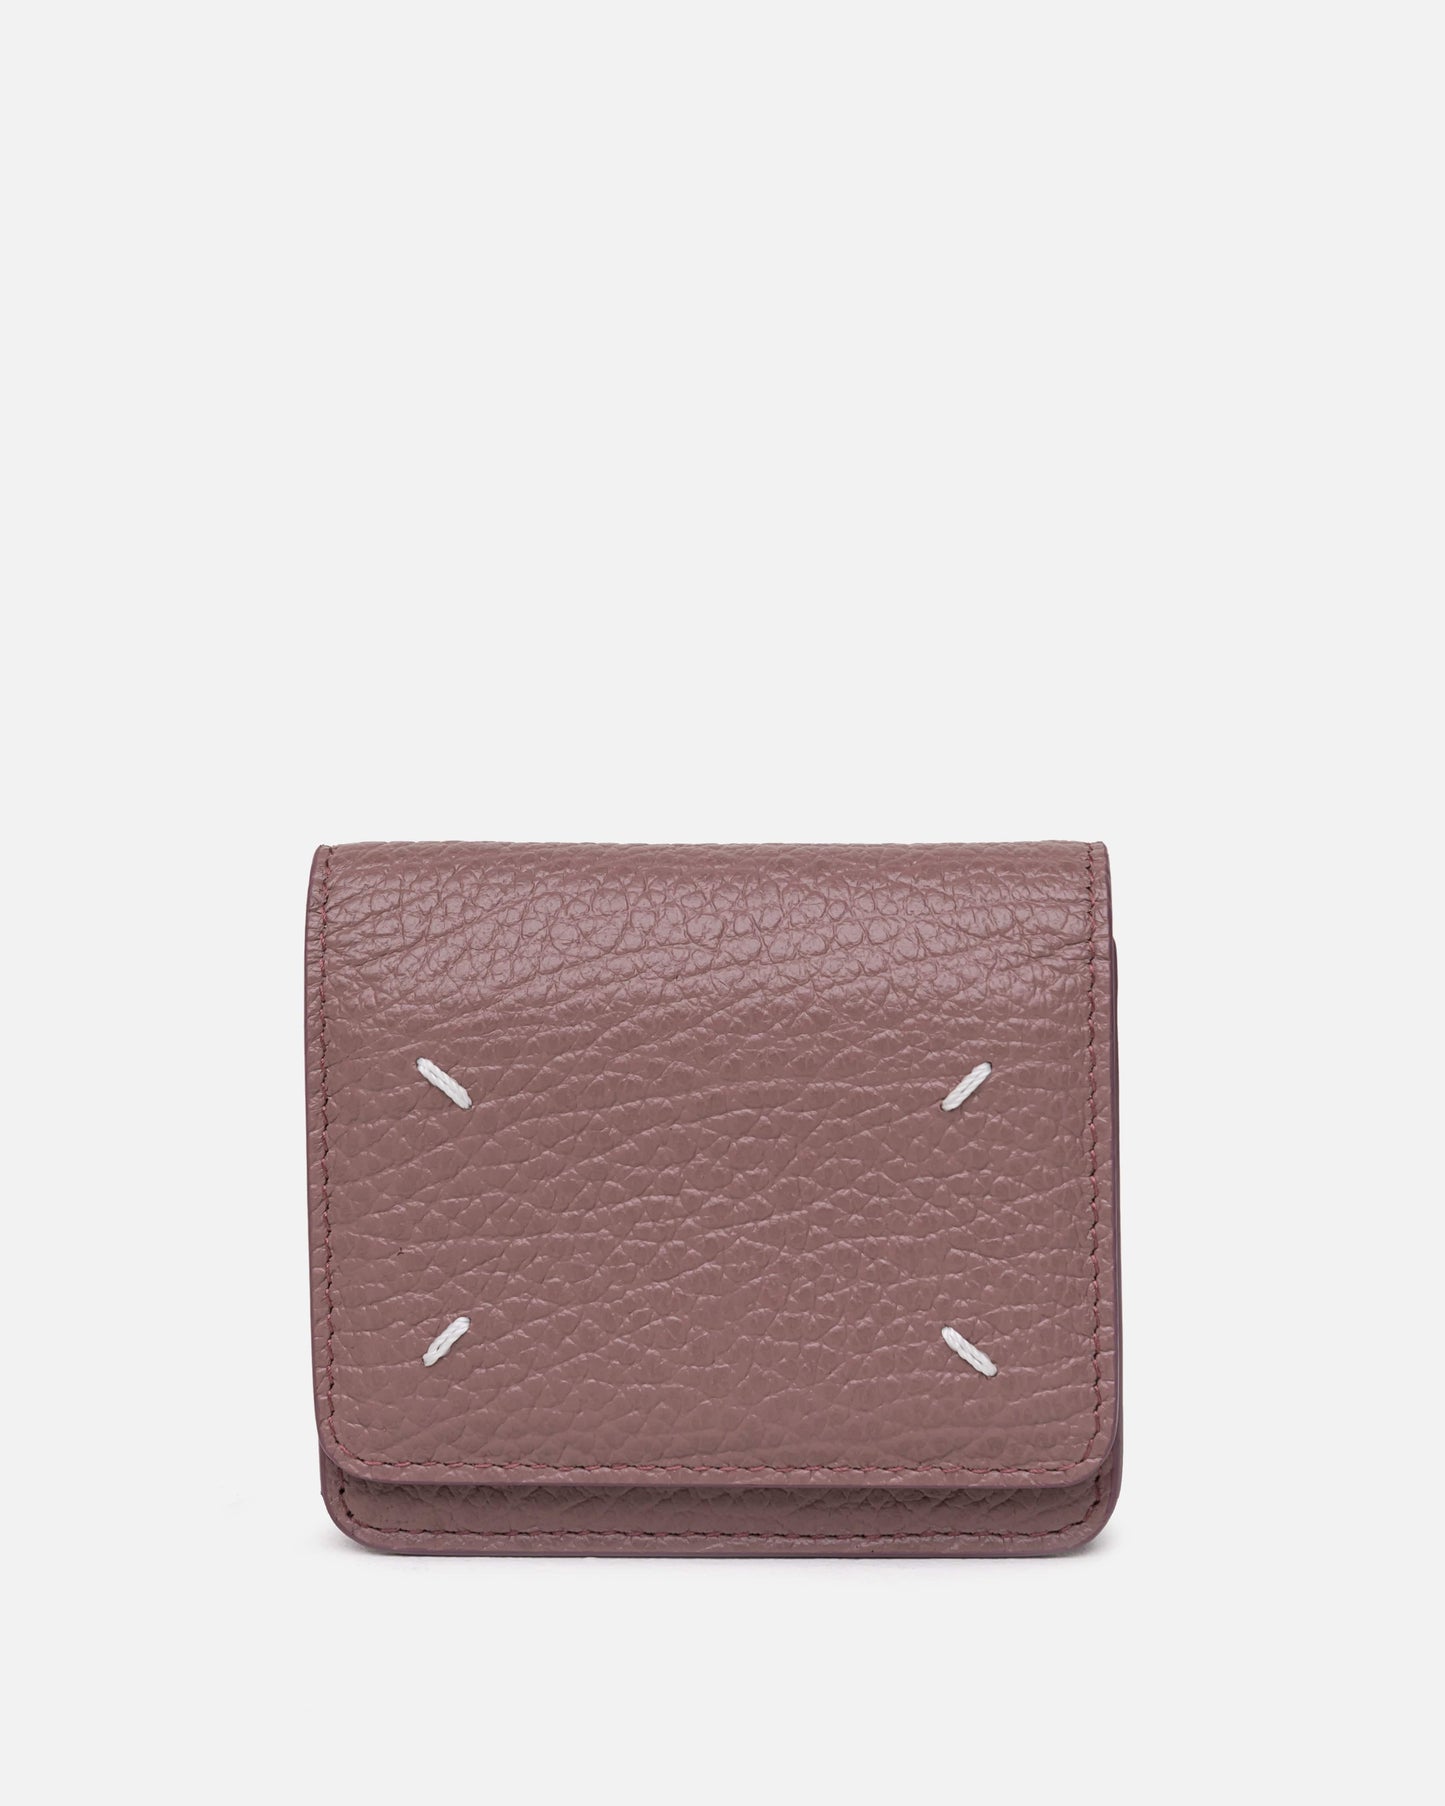 Maison Margiela Leather Goods Small Chain Wallet in Pink